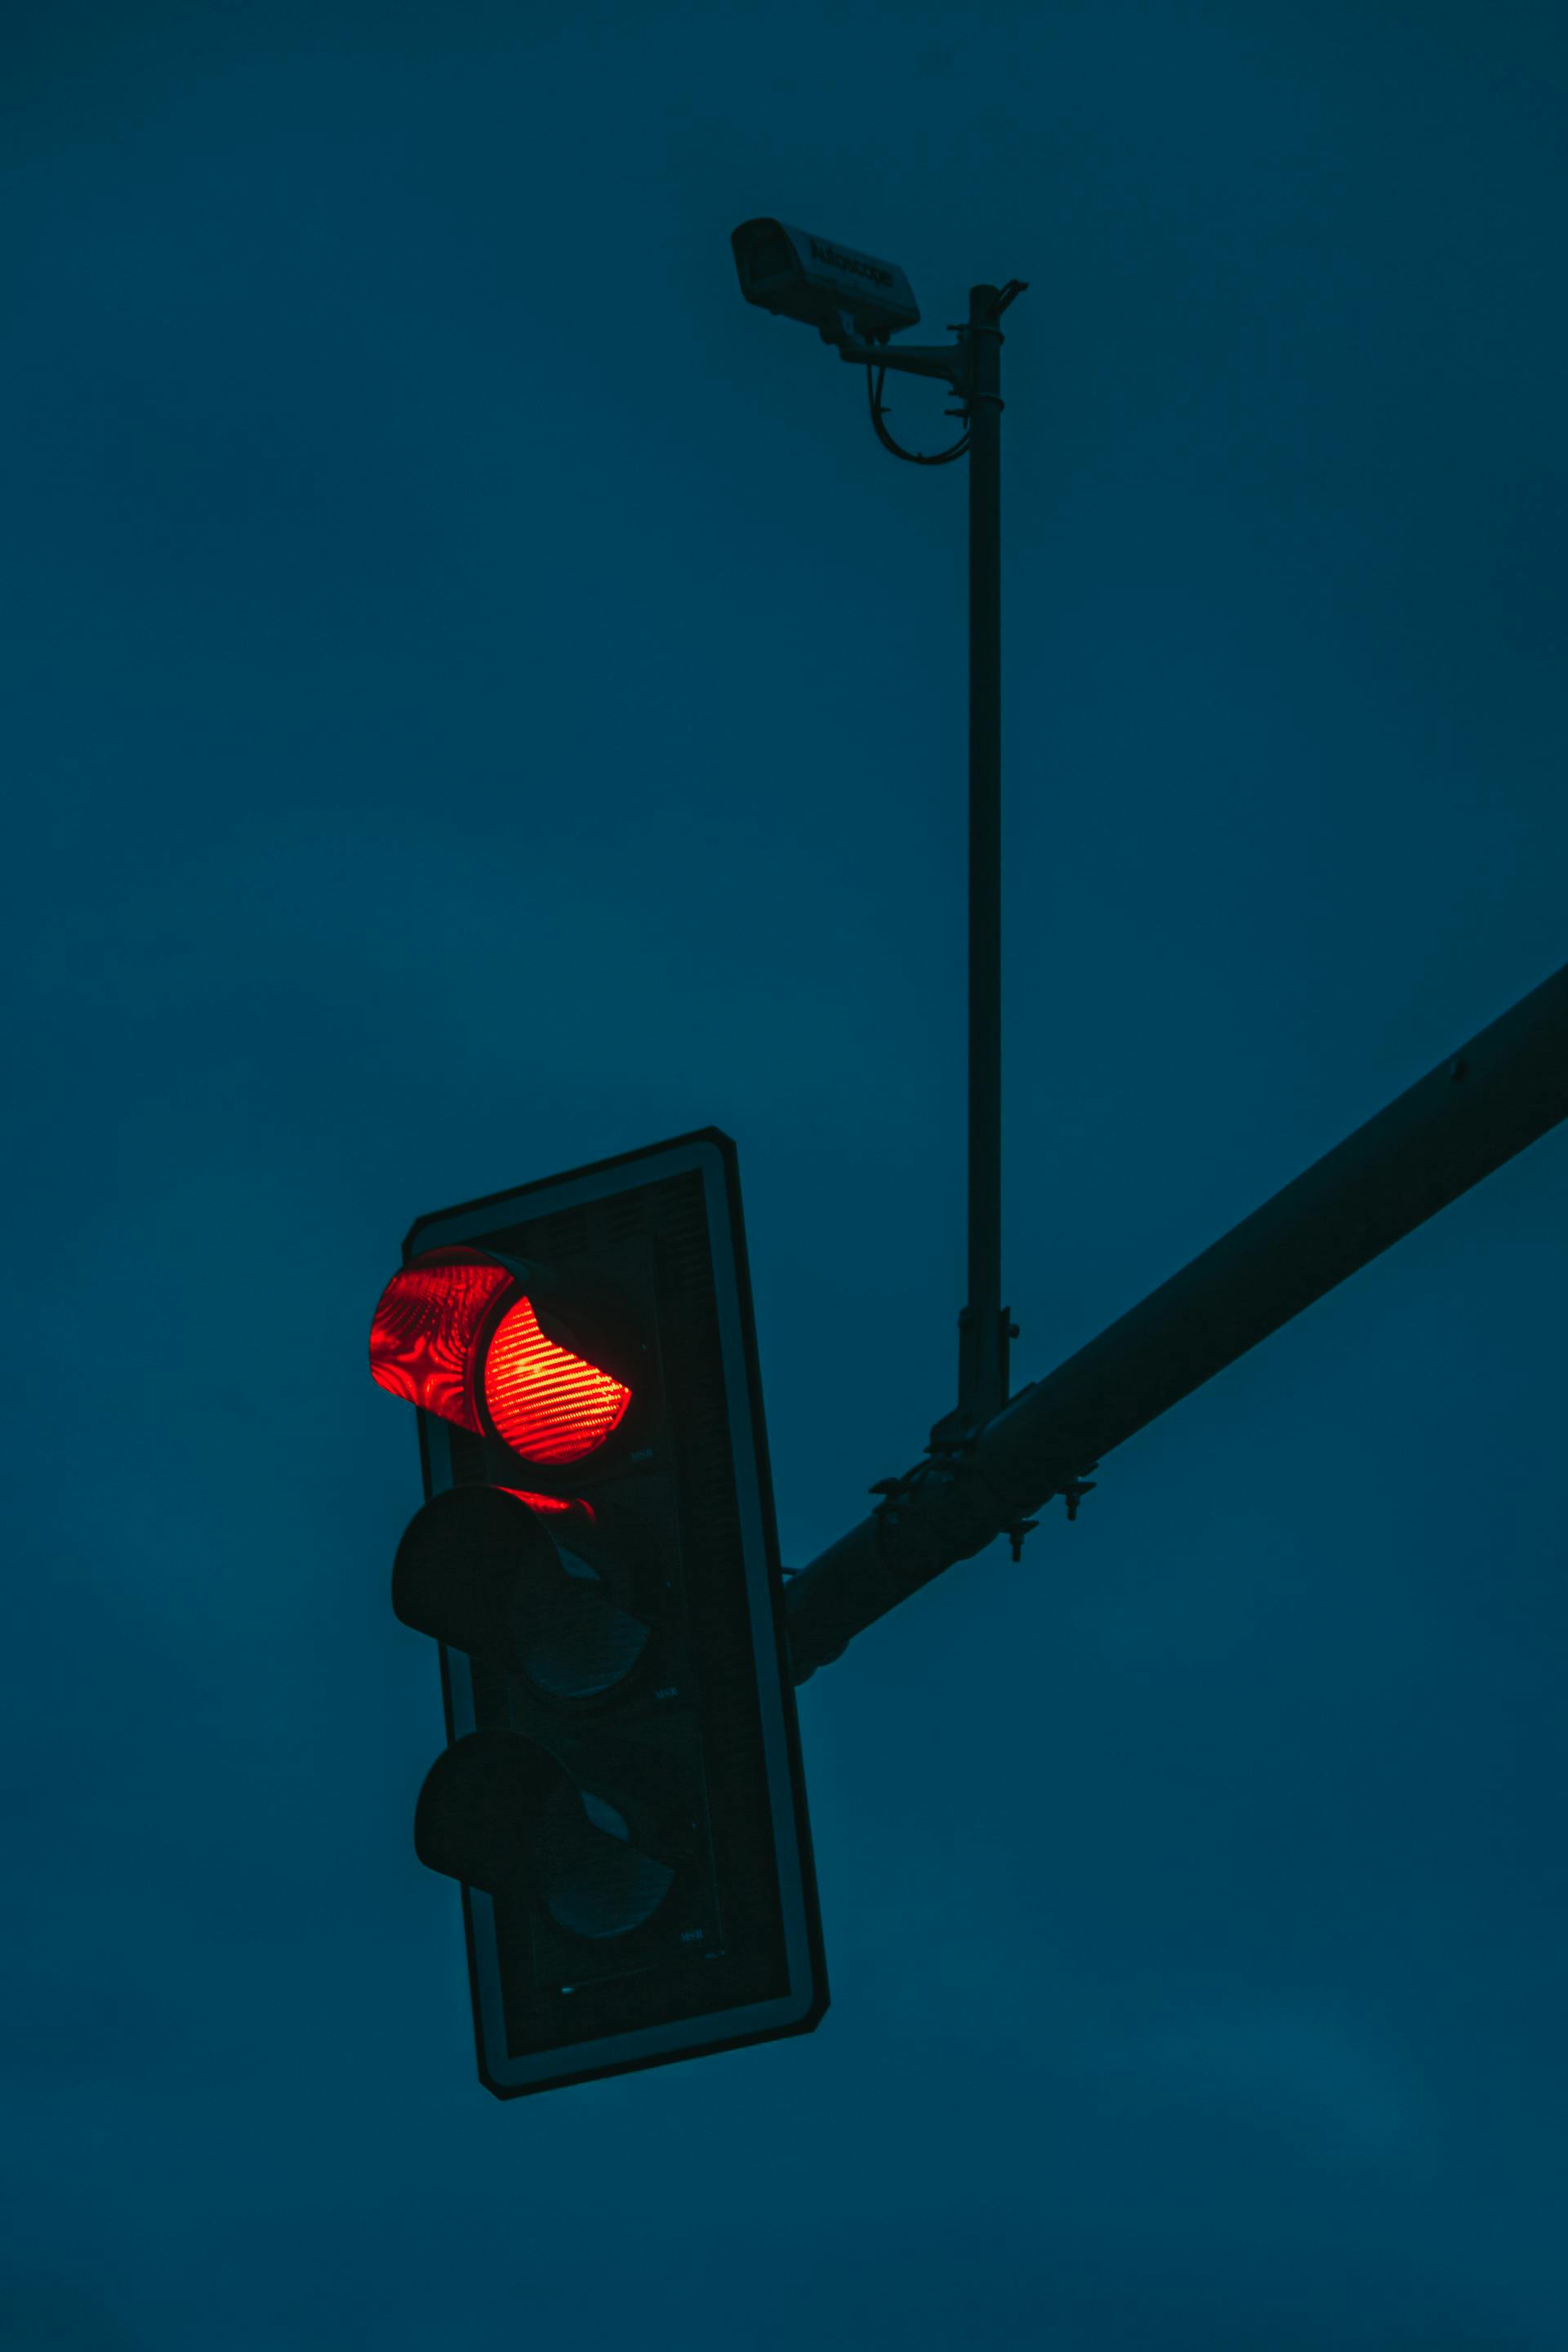 A red traffic light | Source: Pexels